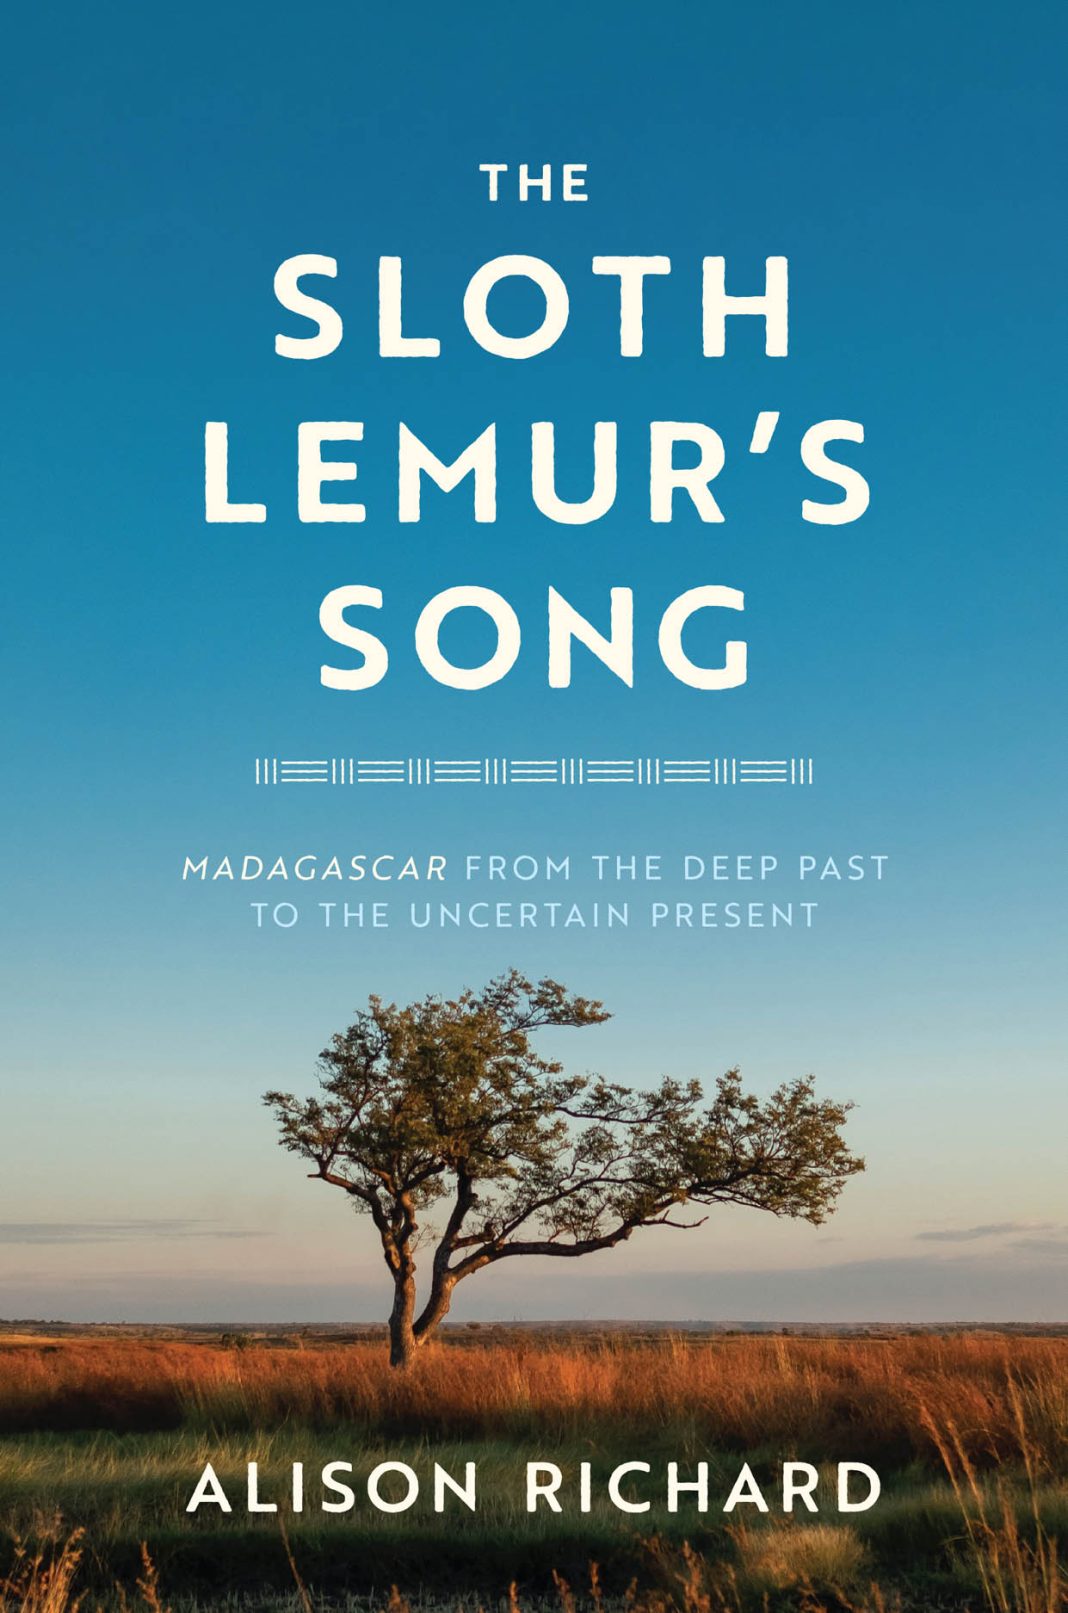 5-questions-with-alison-richard,-author-of-“the-sloth-lemur’s-song:-madagascar-from-the-deep-past-to-the-uncertain-present”